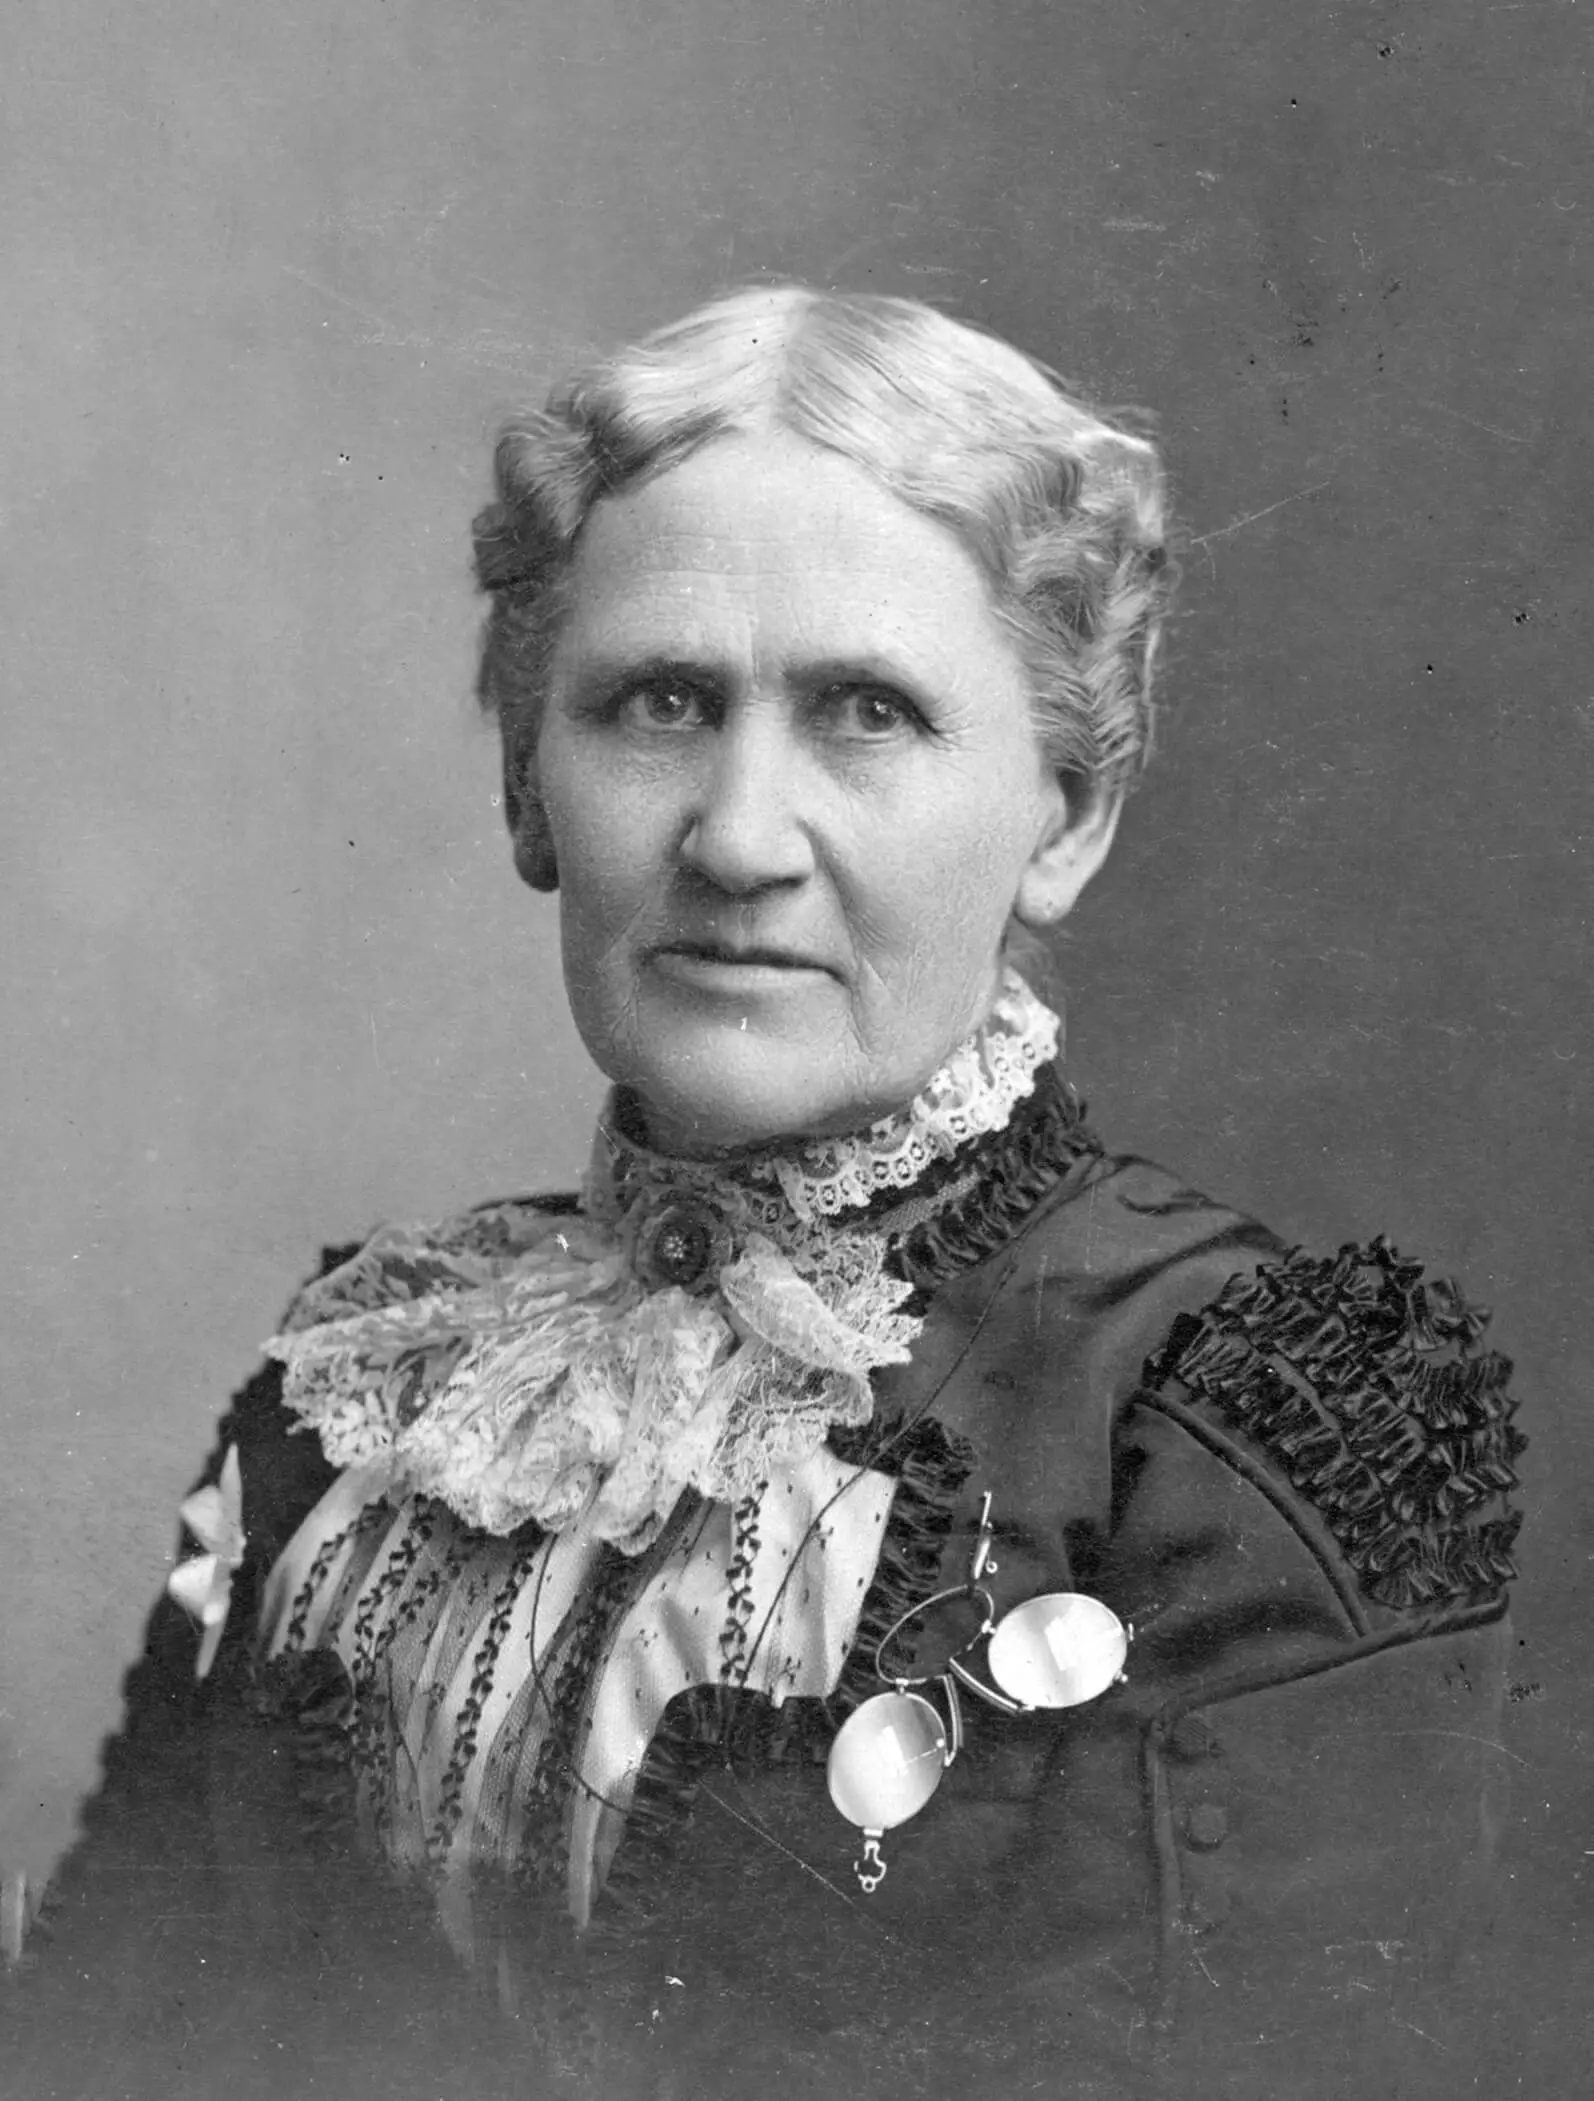 Black and white portrait of an older white woman in an ornate dress, white hair pulled back